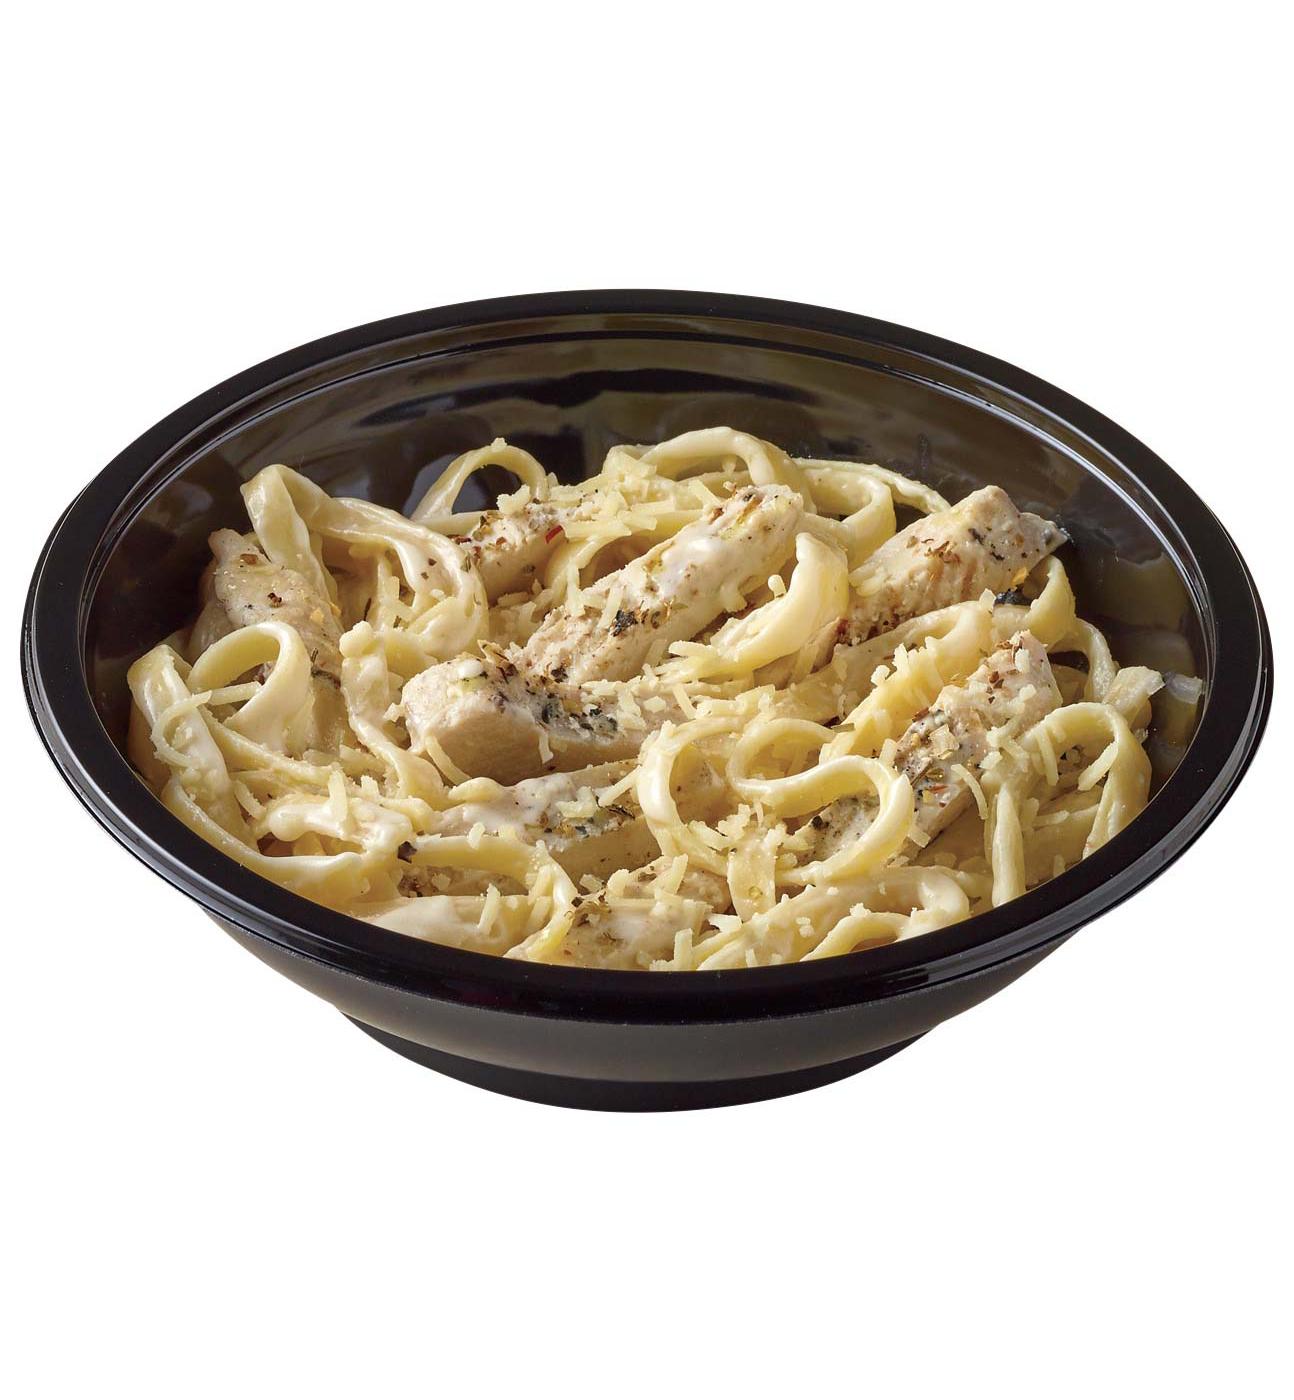 Meal Simple by H-E-B Chicken Fettuccine Alfredo Bowl; image 4 of 4